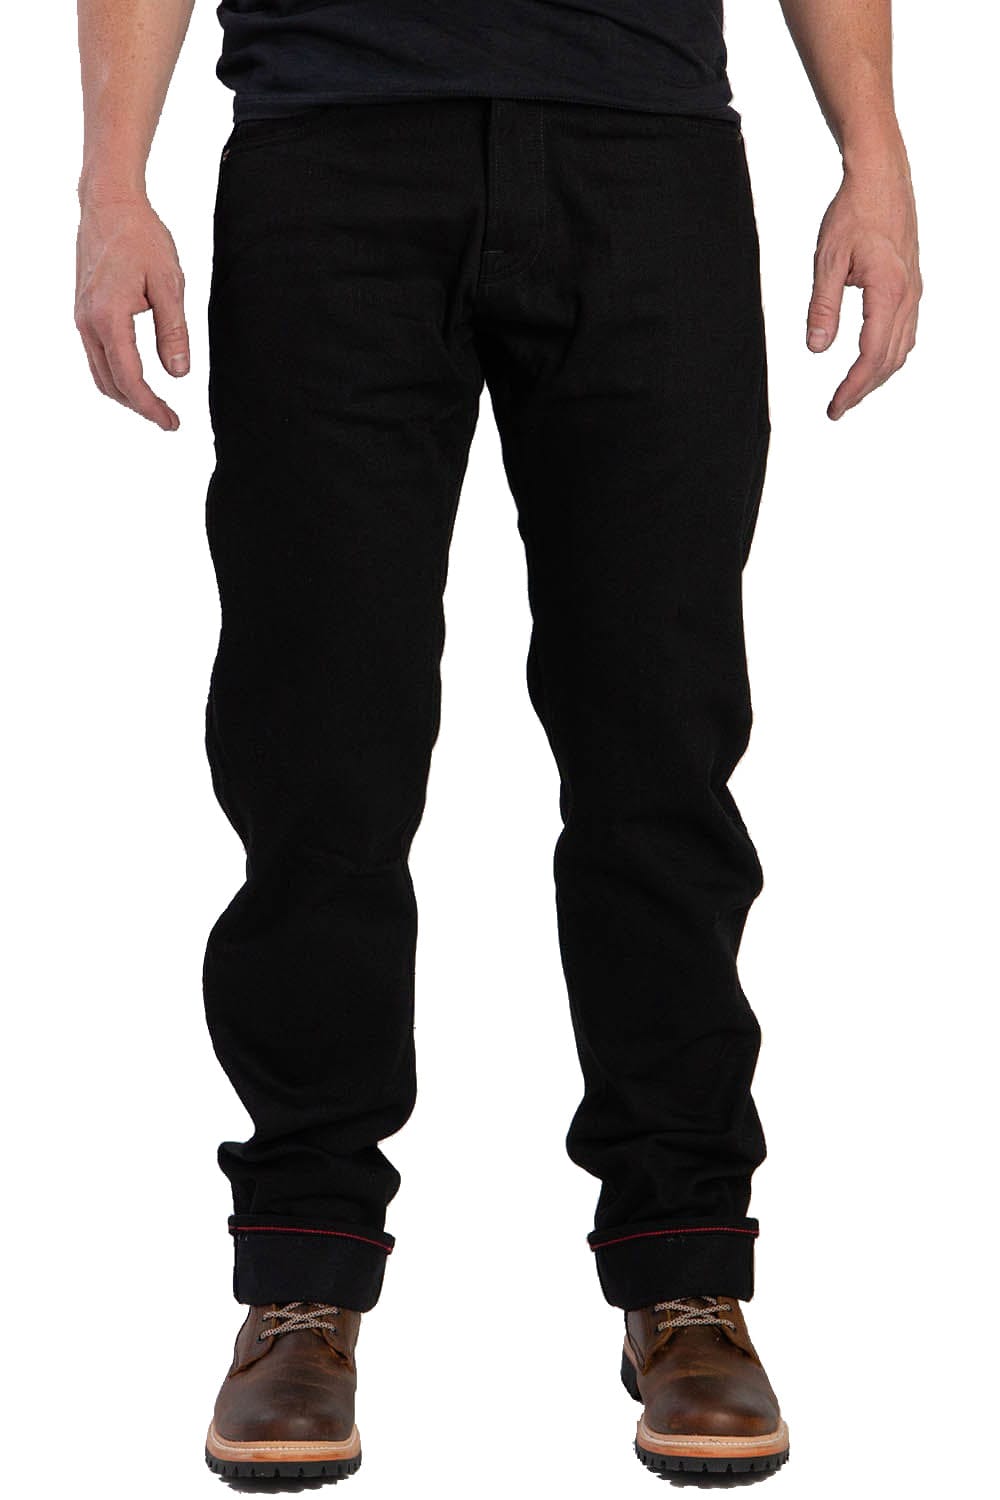 Caballo Relaxed Fit Black Protective Motorcycle Jeans - Feat. Protective  DuPont™ Kevlar® Lining, Extra Durable Caballo Seams. 12.25 oz Ghirardelli  Pre-washed Stretch Denim - Tobacco Motorwear